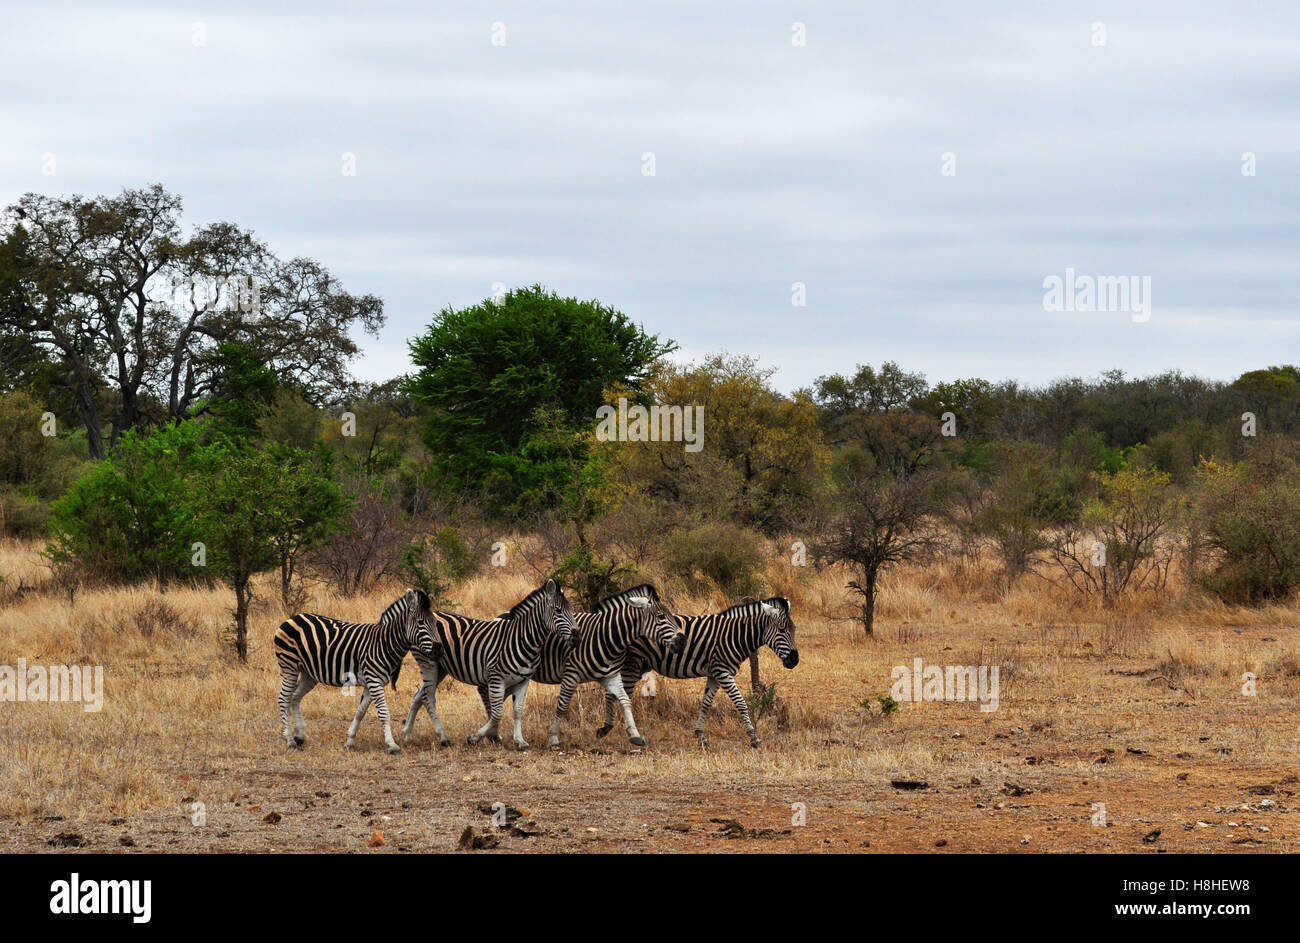 Safari in South Africa, green savannah: a herd of zebras in the Kruger National Park, the largest game reserve in Africa established in 1898 Stock Photo